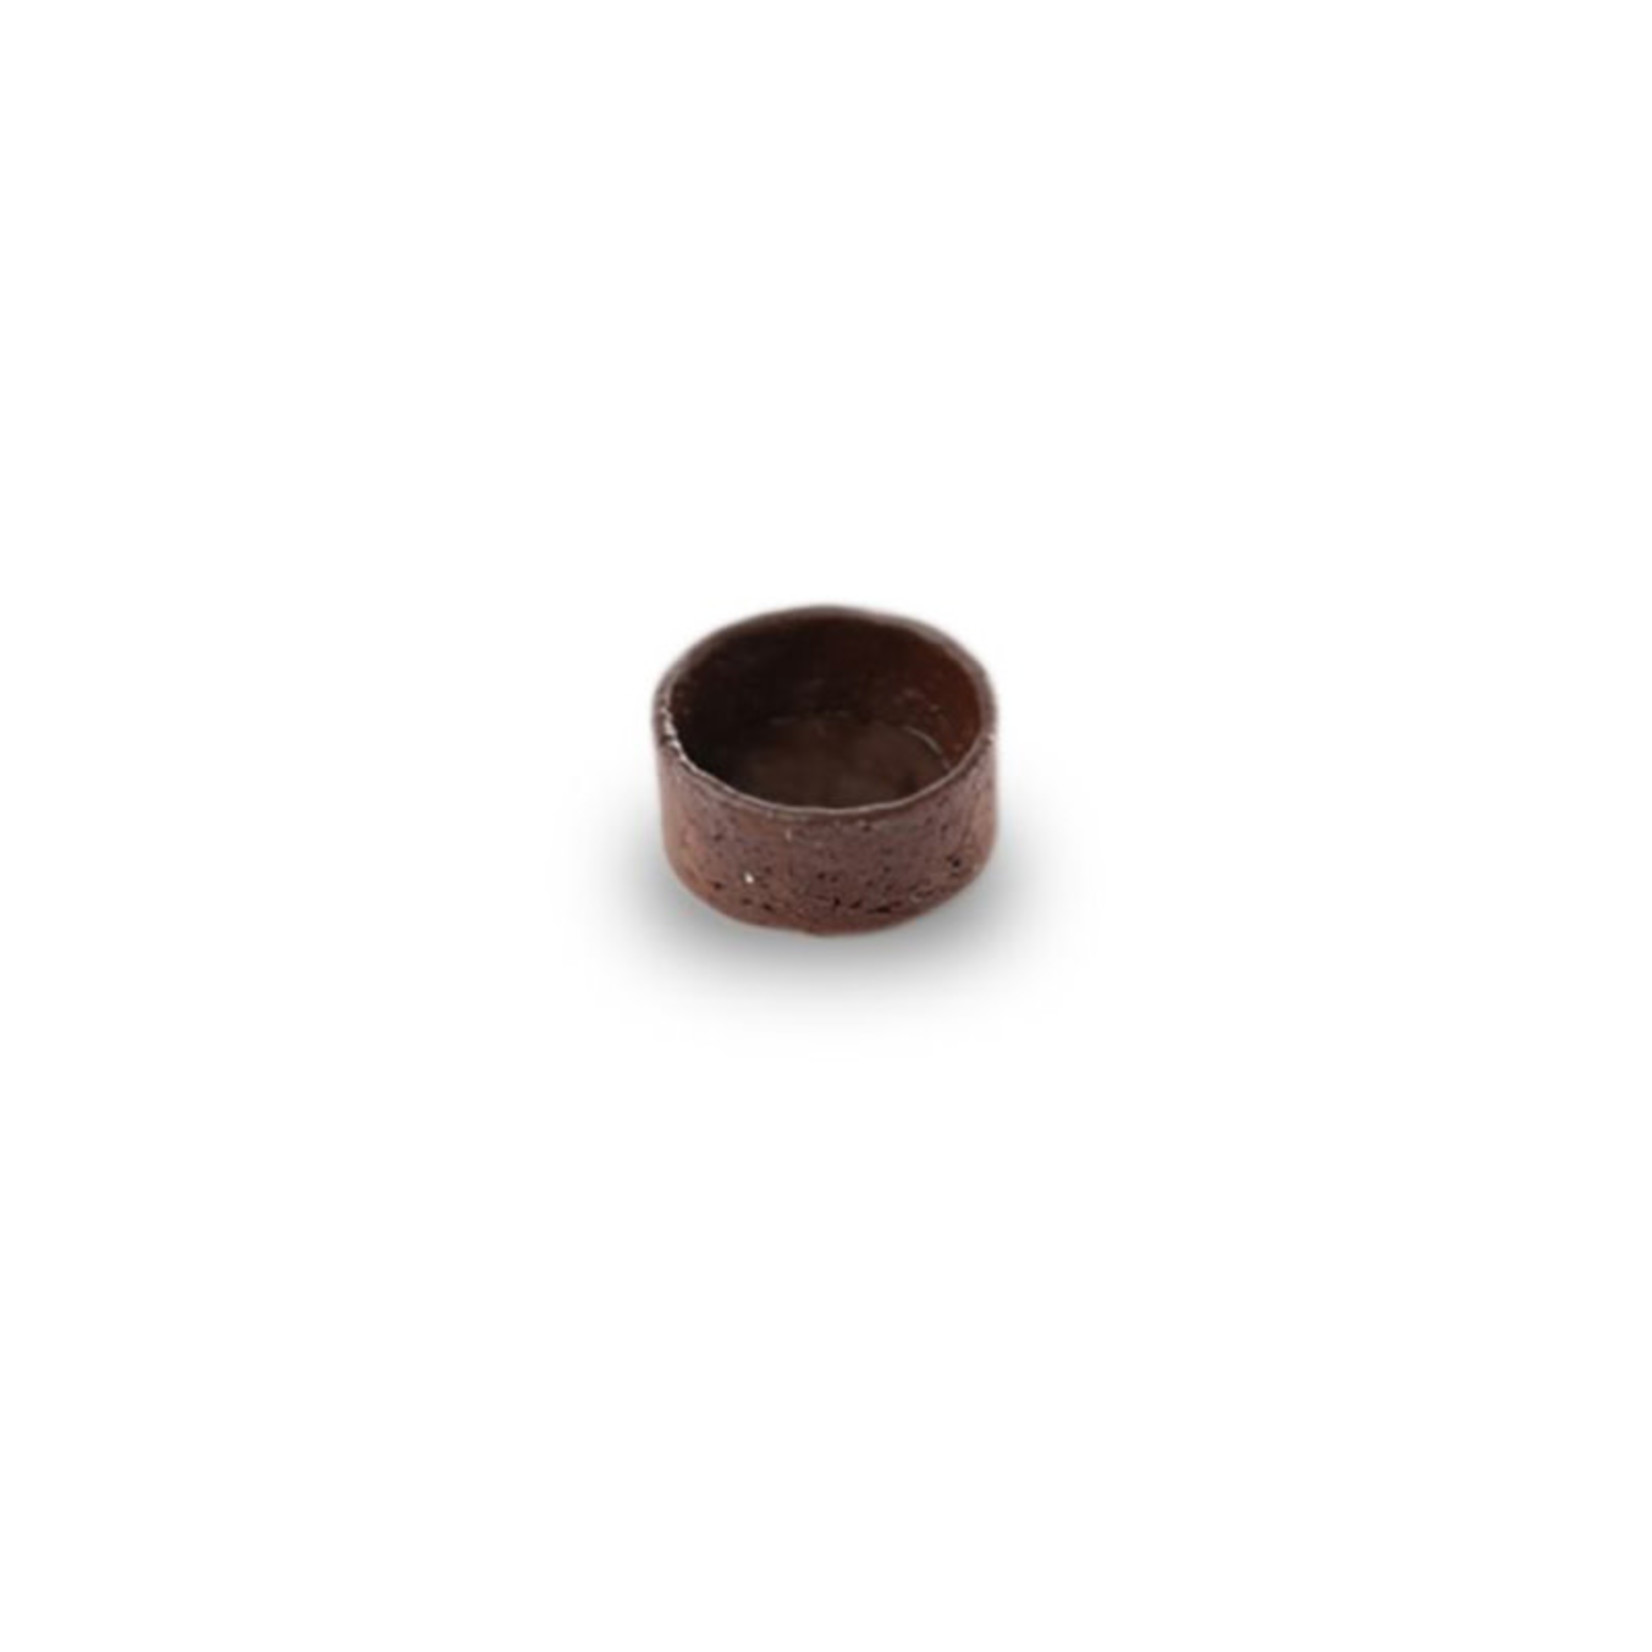 Le Chic Patissier Le Chic Patissier - Tart shell, Chocolate round - 1.5'' (240ct), 78448